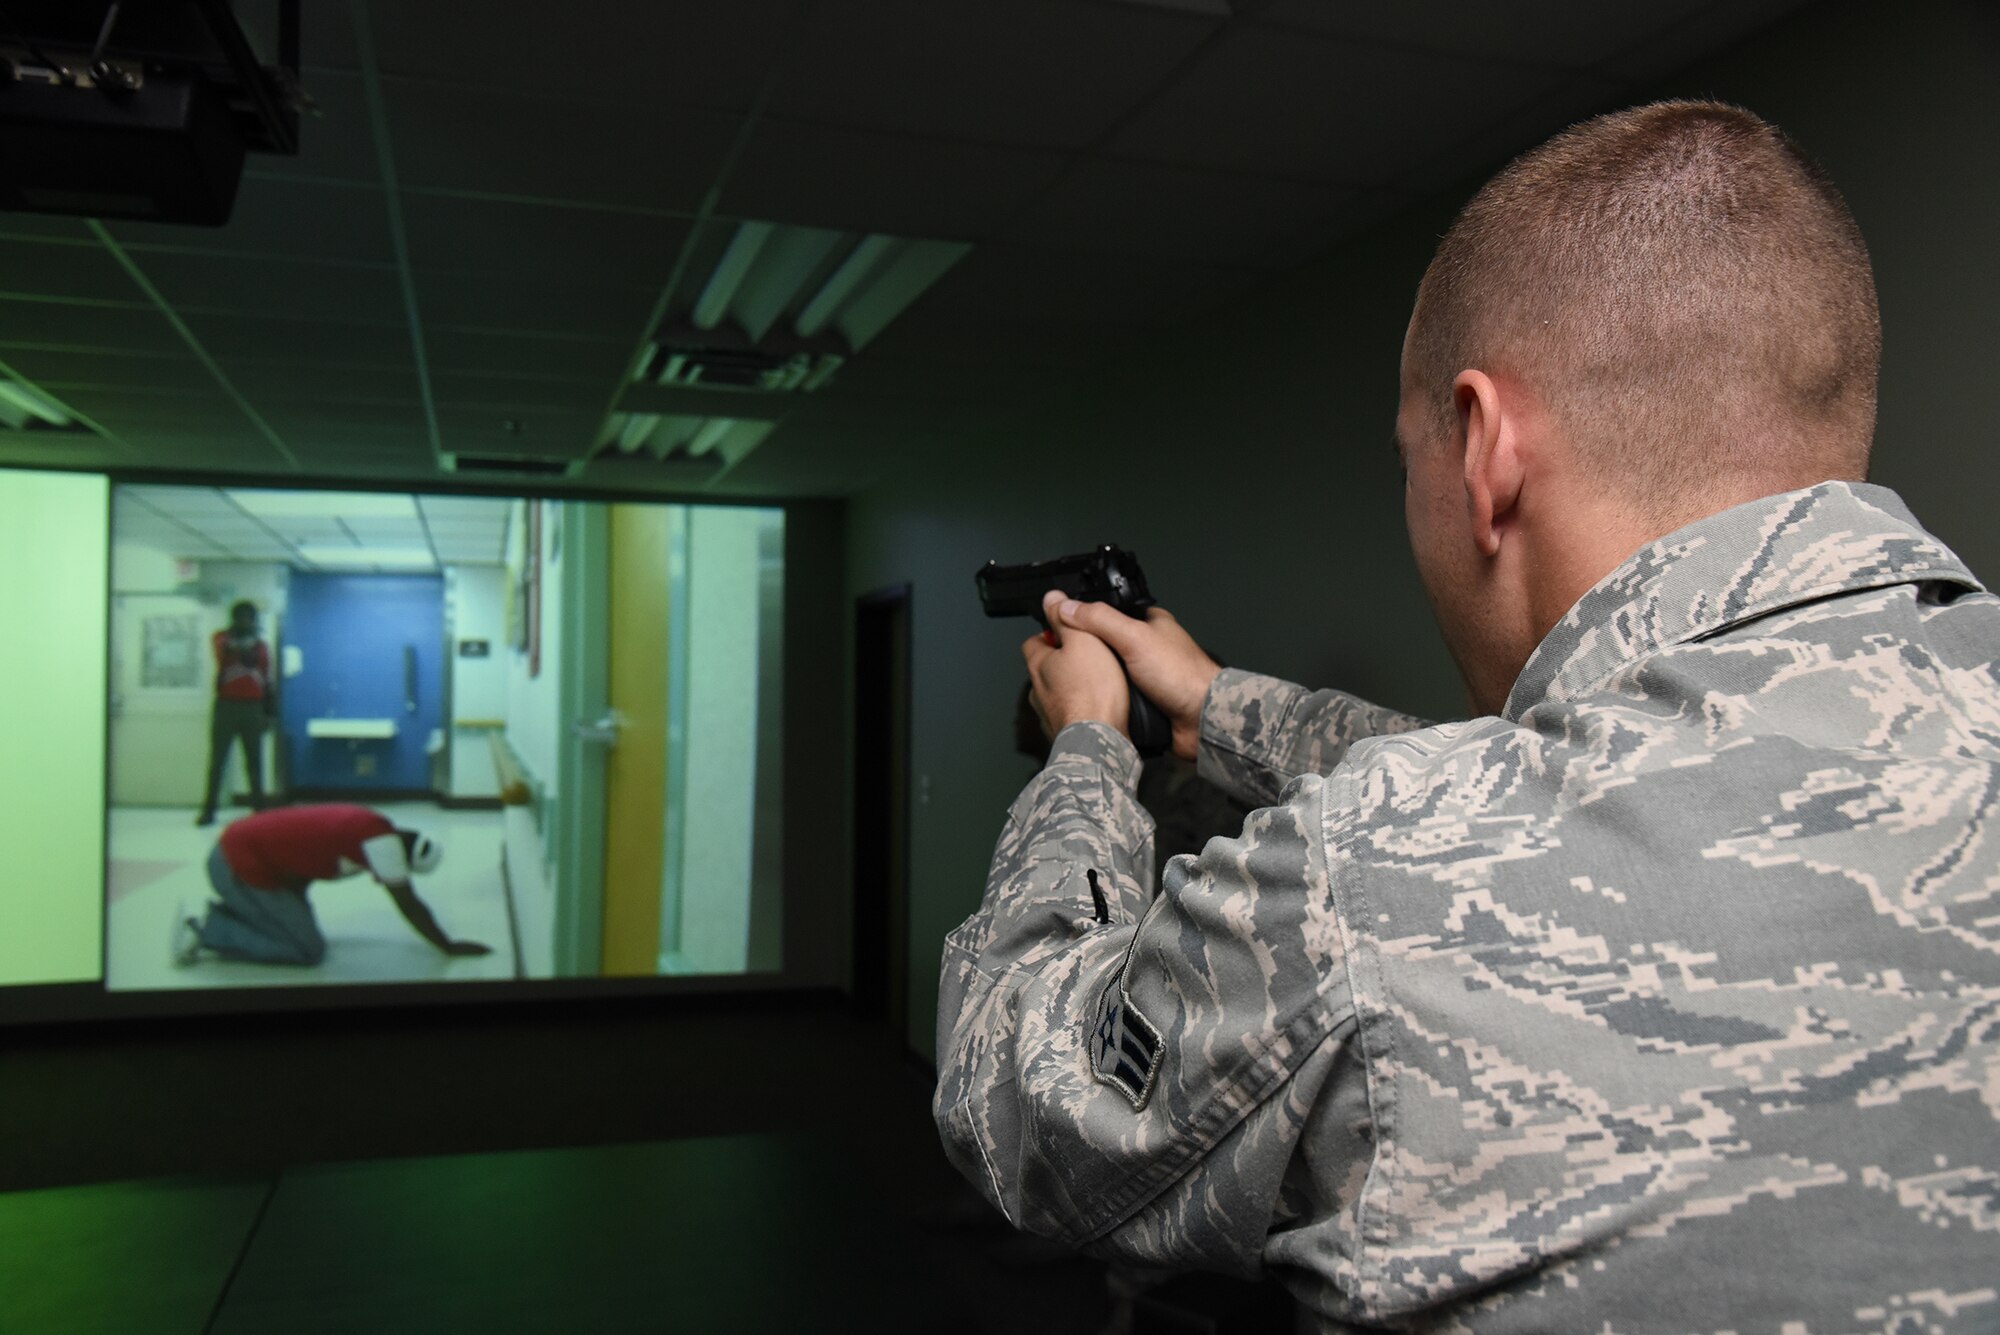 Senior Airman Sebastian Green, 403rd Security Forces Squadron fire team member, trains on the latest version of the Firearms Training System at Keesler Air Force Base, Mississippi, Oct. 4, 2015. The system provides multiple, realistic scenarios for which security forces members can receive instant feedback based on their training performance. (U.S. Air Force photo/Tech. Sgt. Ryan Labadens)